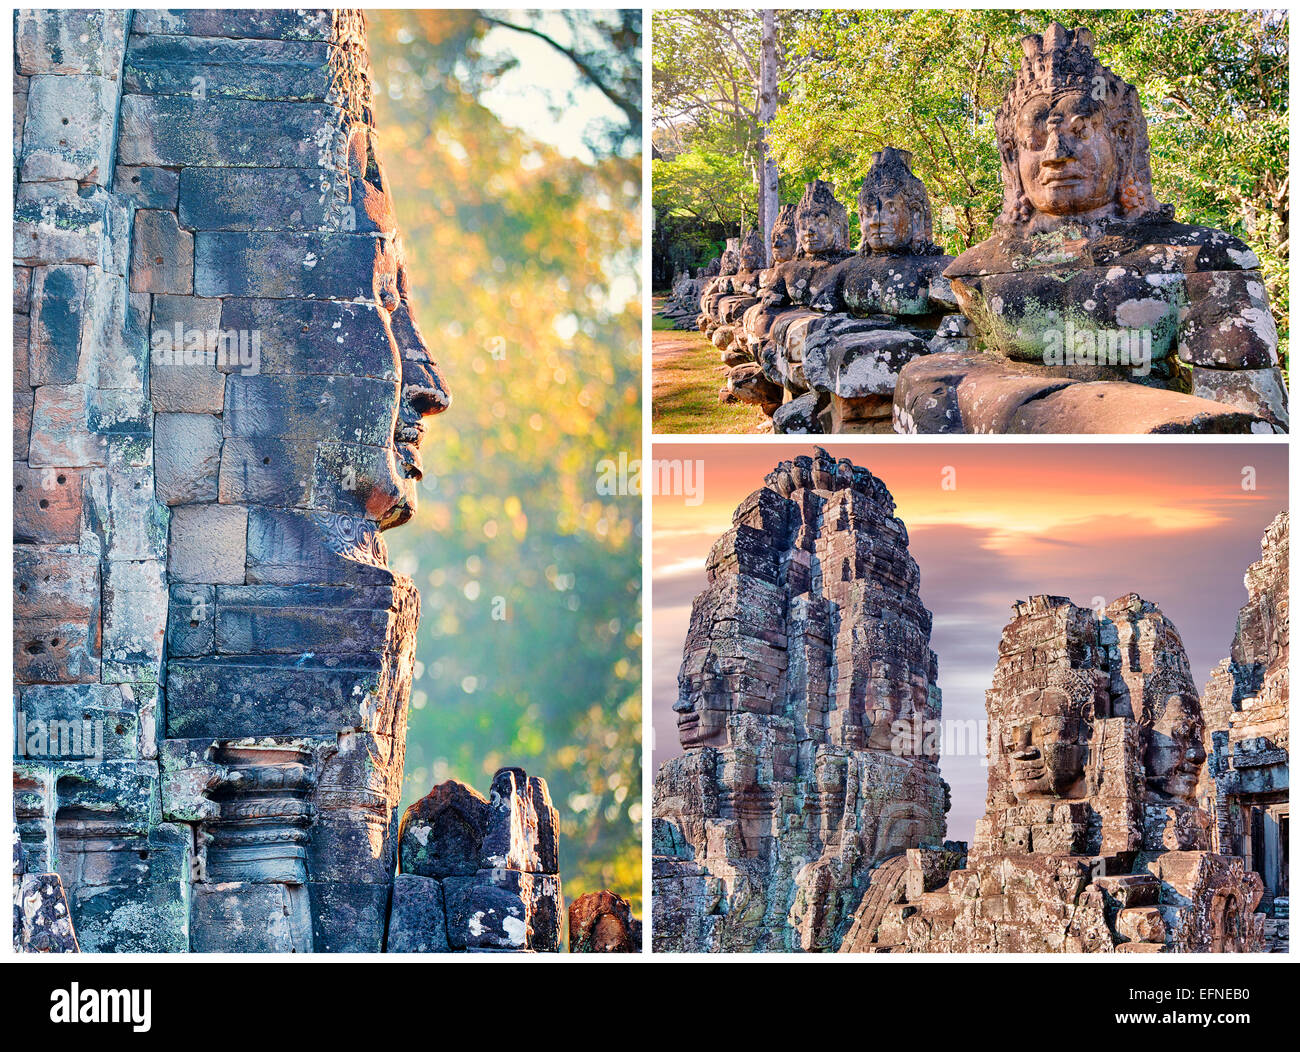 Ancient stone faces of Bayon temple, Angkor, collage Stock Photo